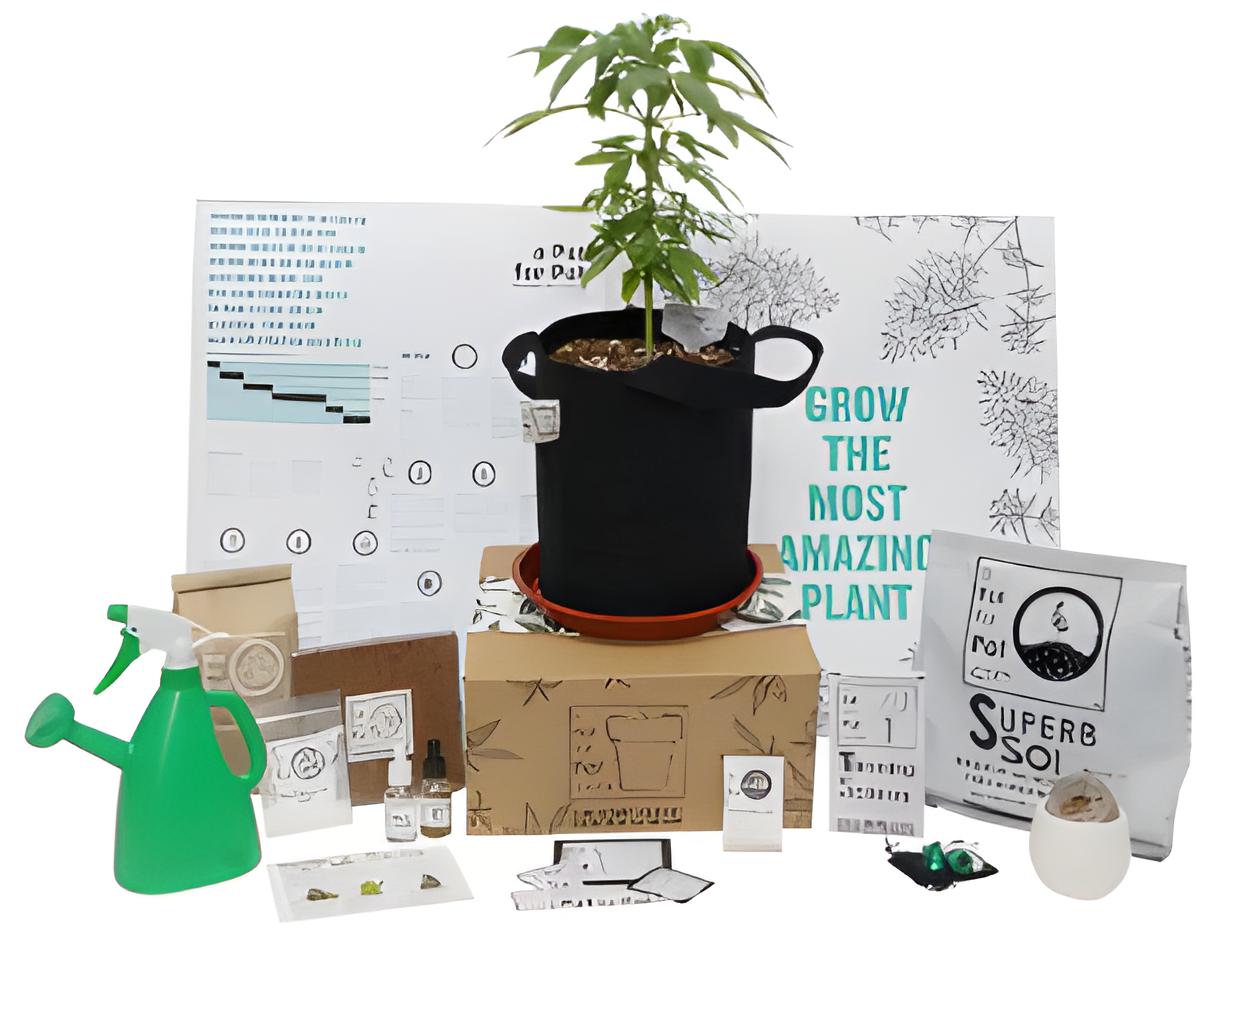 ‘A Pot for Pot’ Review: Simple, DIY Home Cannabis Cultivation Kits